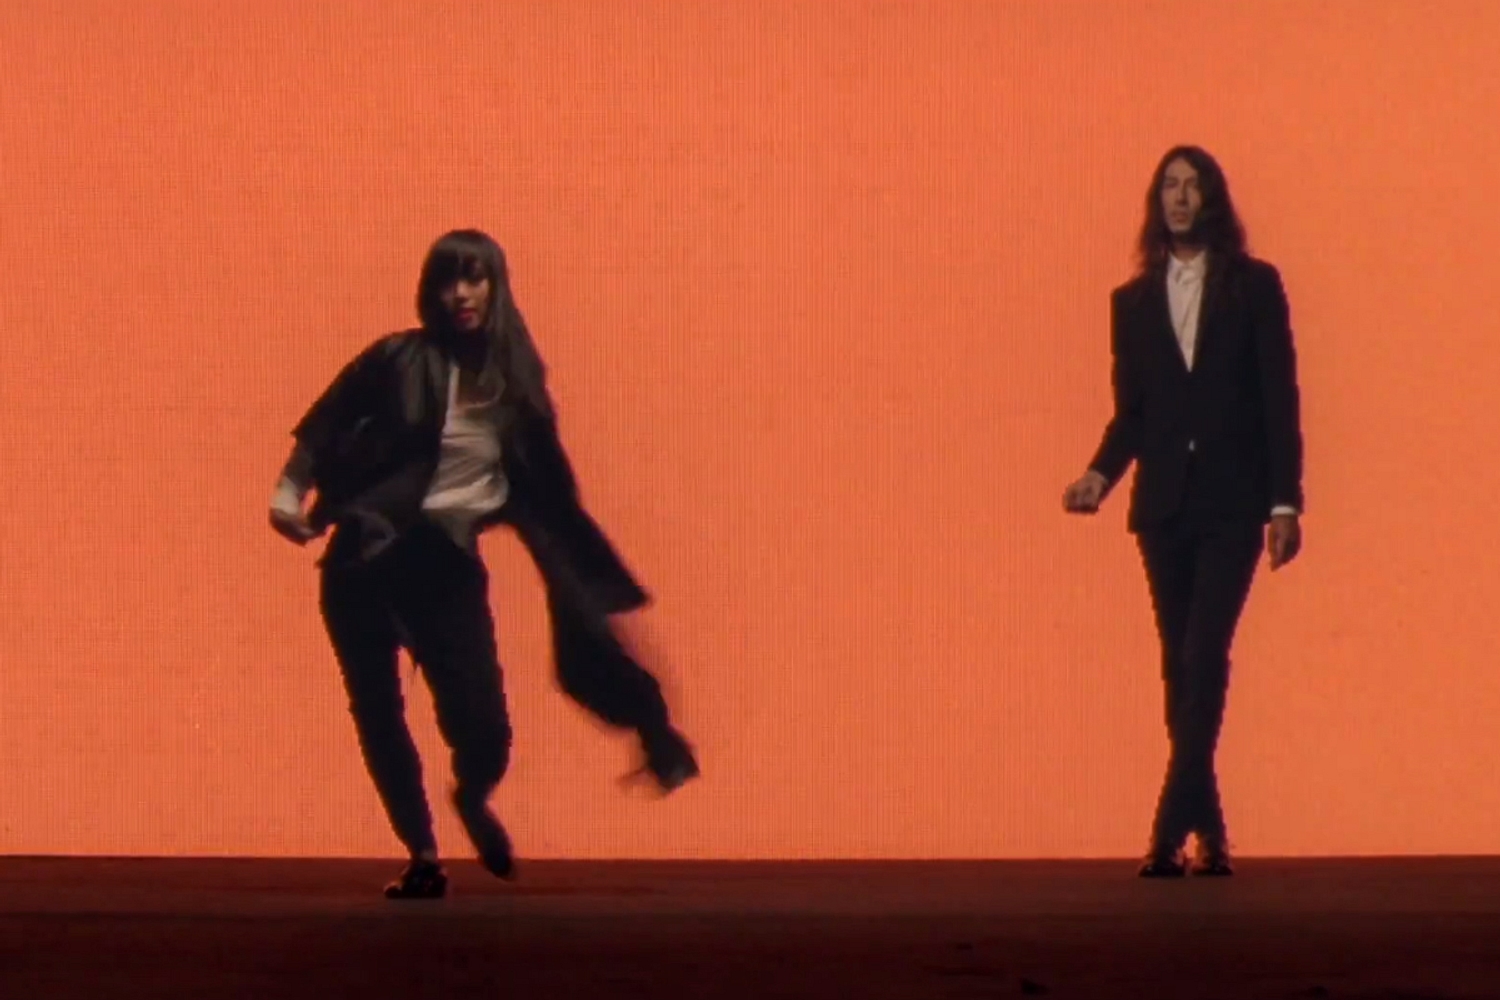 Kindness premieres new track ‘This Is Not About Us’